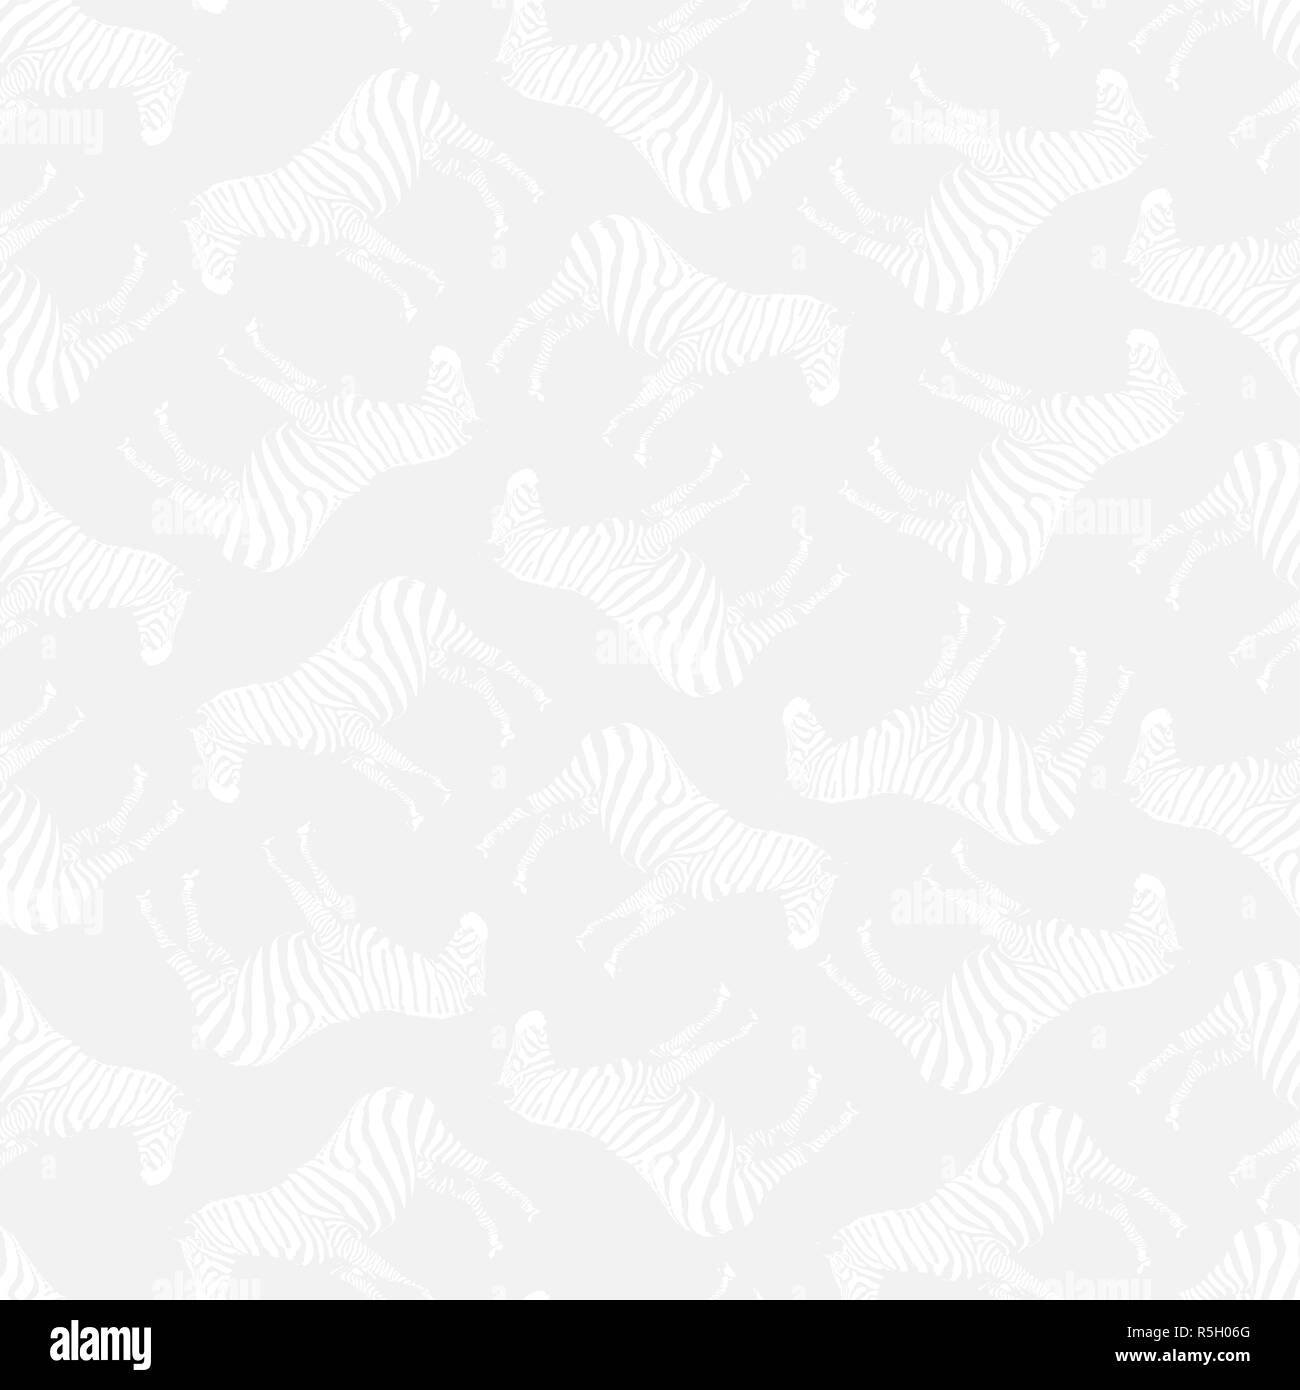 Vector Illustration. Semaless Pattern. Light Grey Background with White Inconspicuous Zebras. Stock Vector